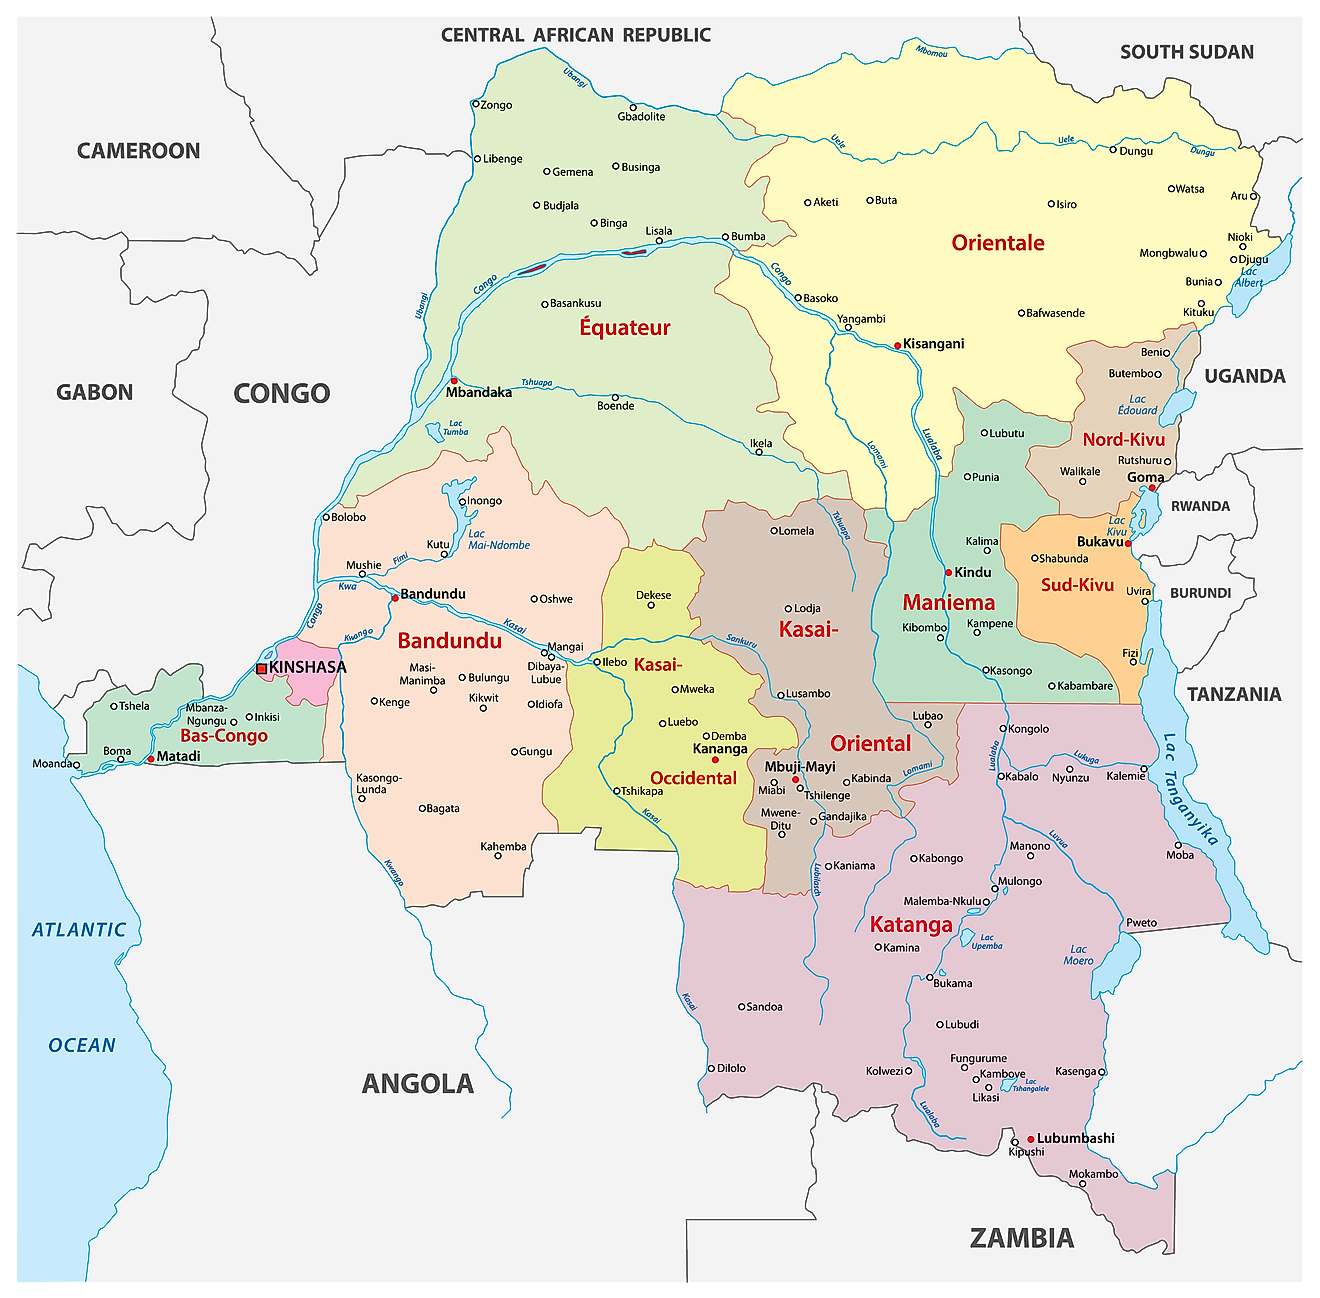 Political map of the Democratic Republic of Congo showing 26 provinces including the capital city of Kinshasa.